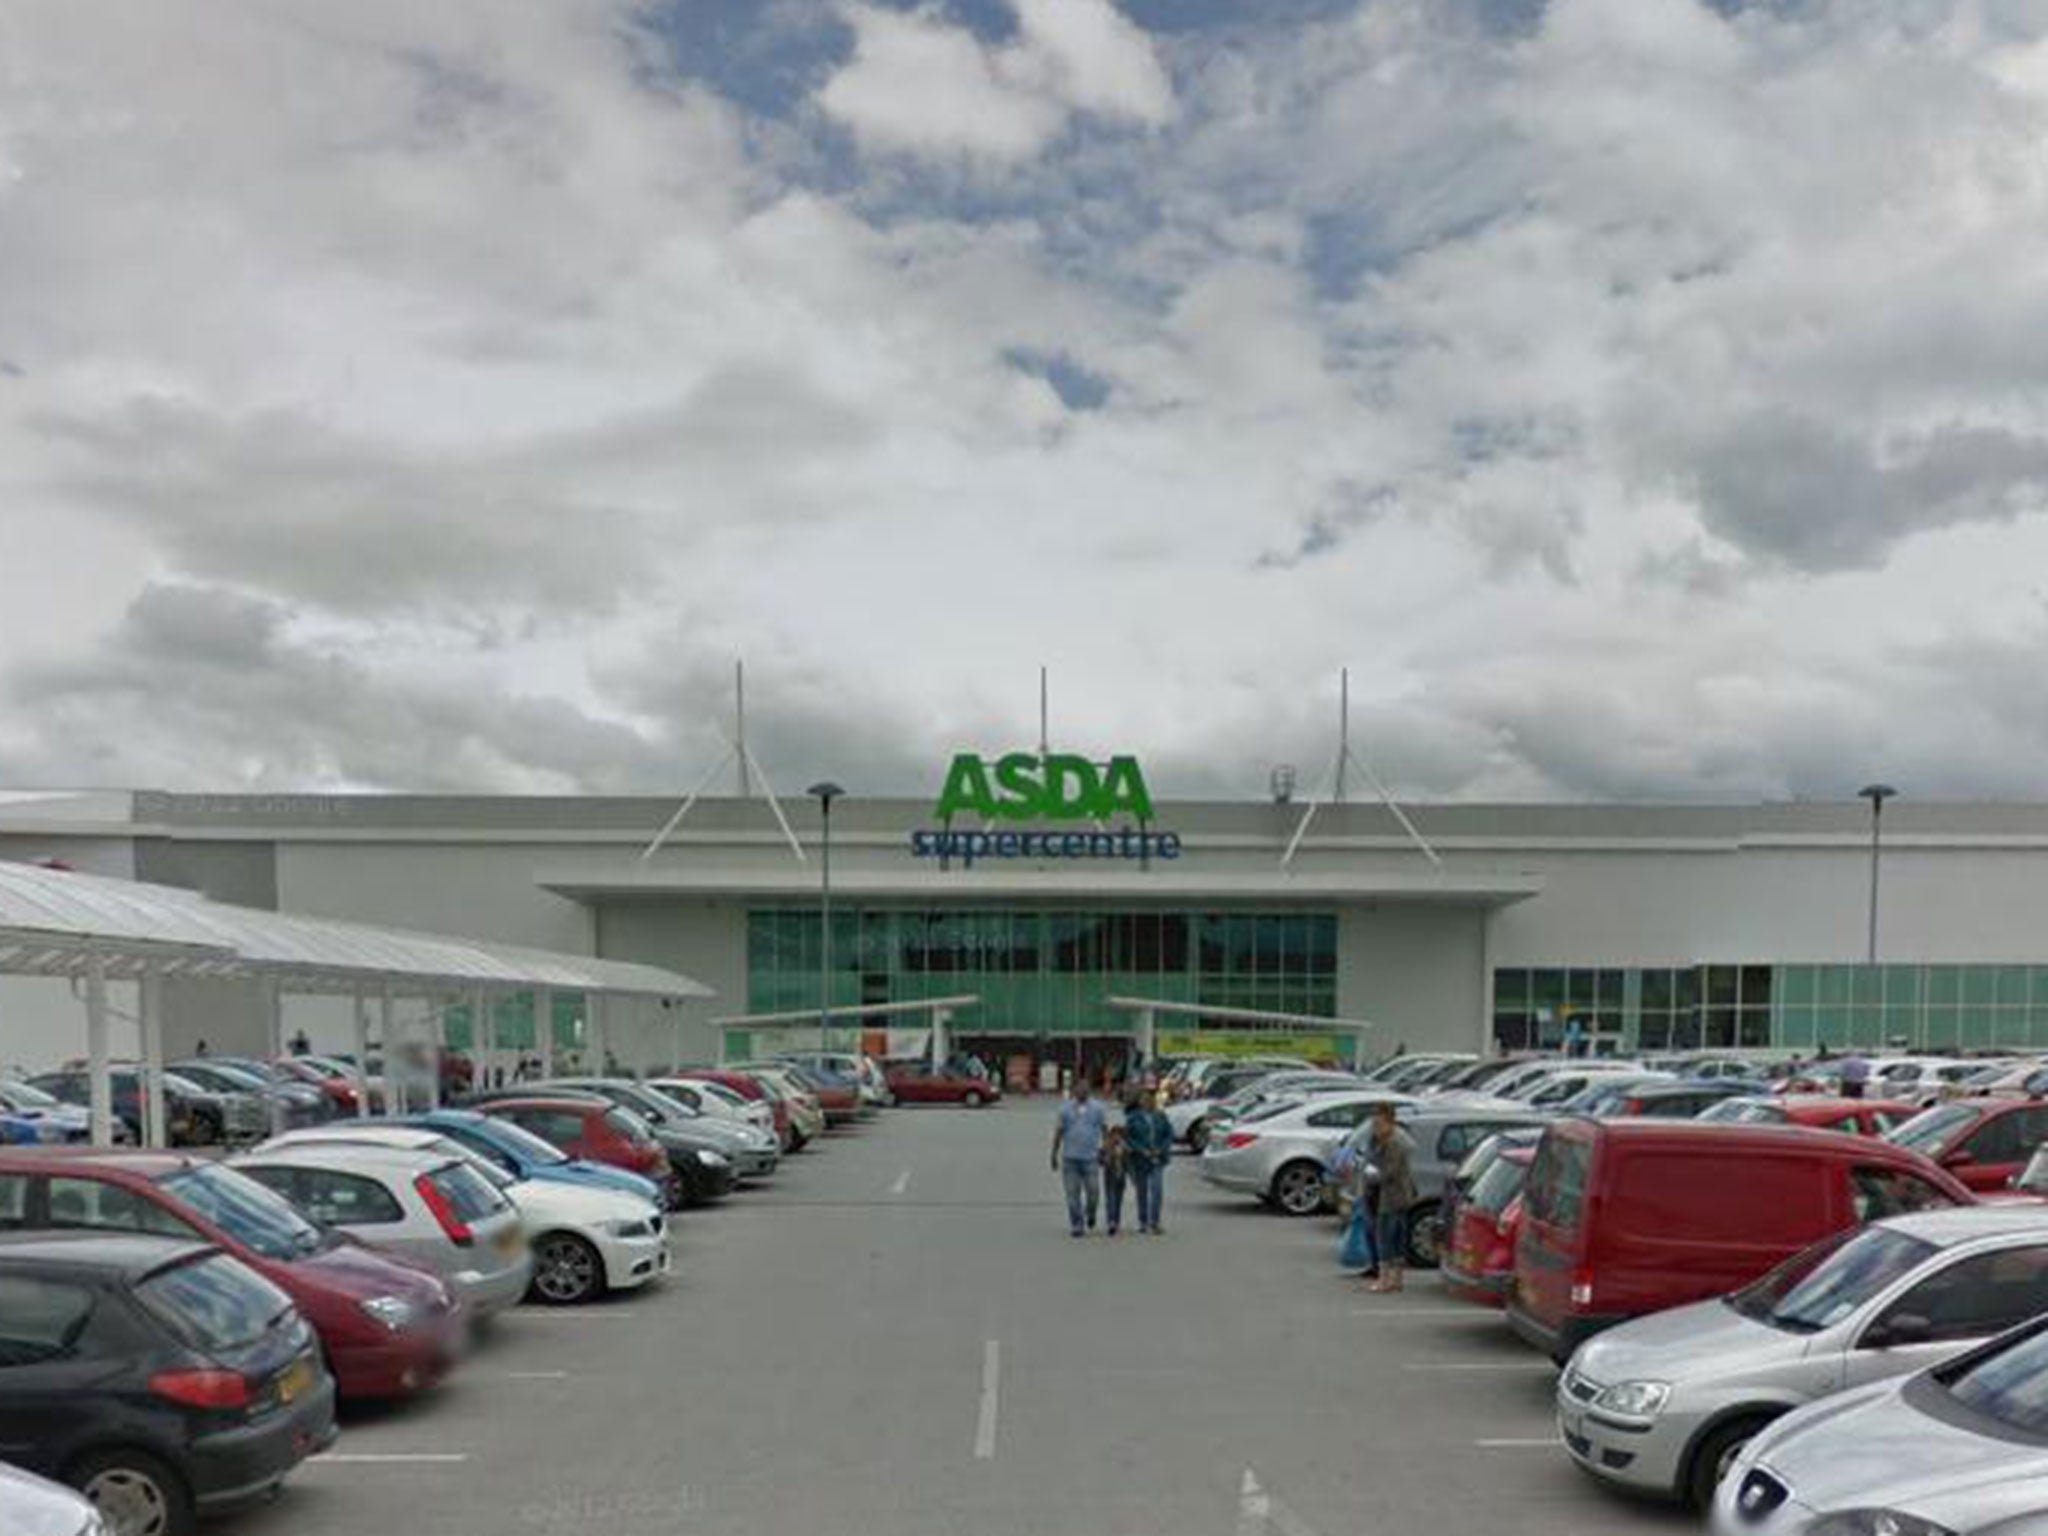 The Asda supercentre in Ellesmere Port was hit by the thefts